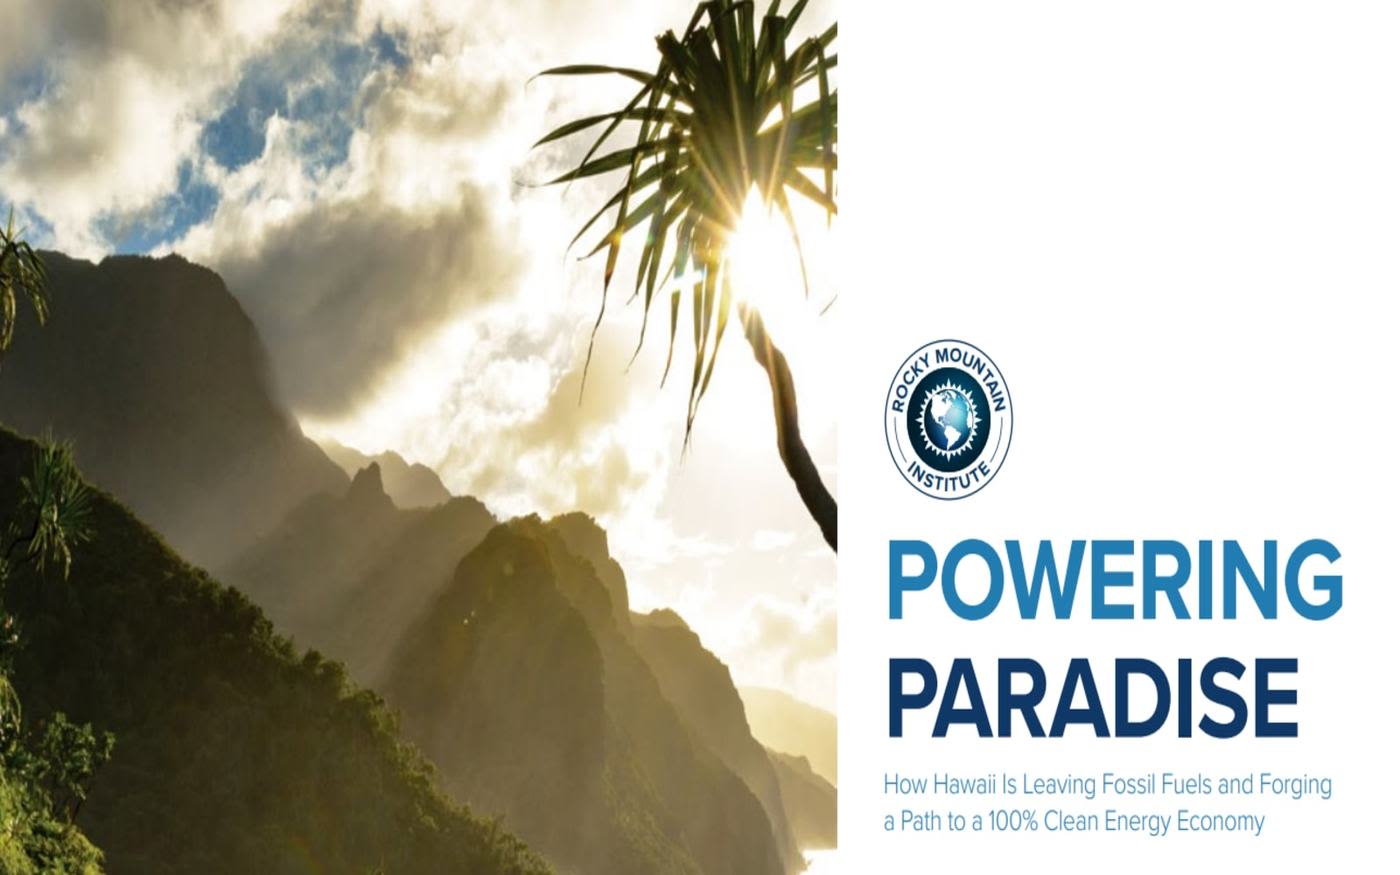 Text 'Powering paradise' shown next to an image of sunlight streaming through clouds over mountains with a palm tree just in view